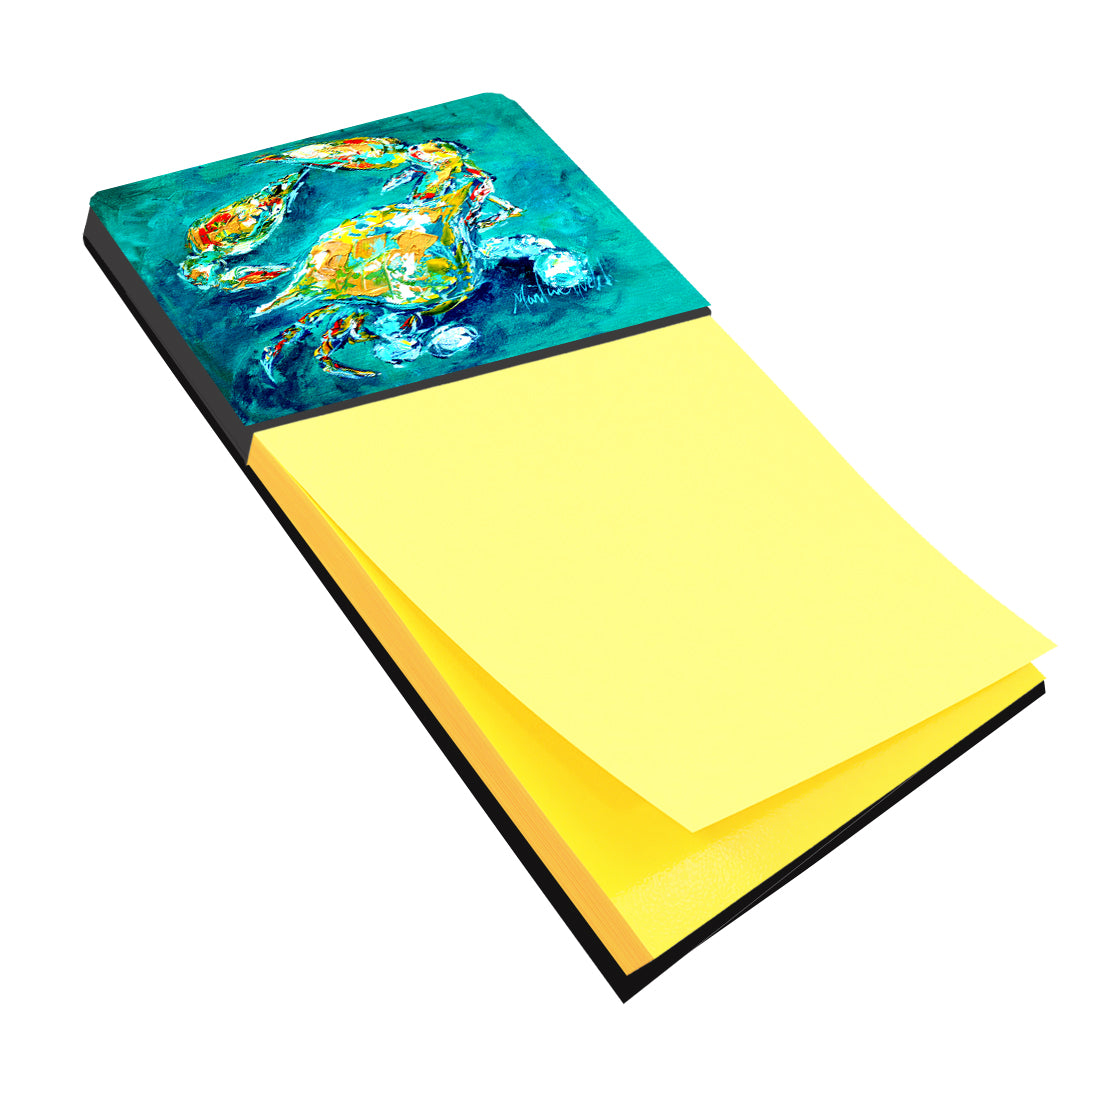 Buy this By Chance Crab in Aqua blue Sticky Note Holder